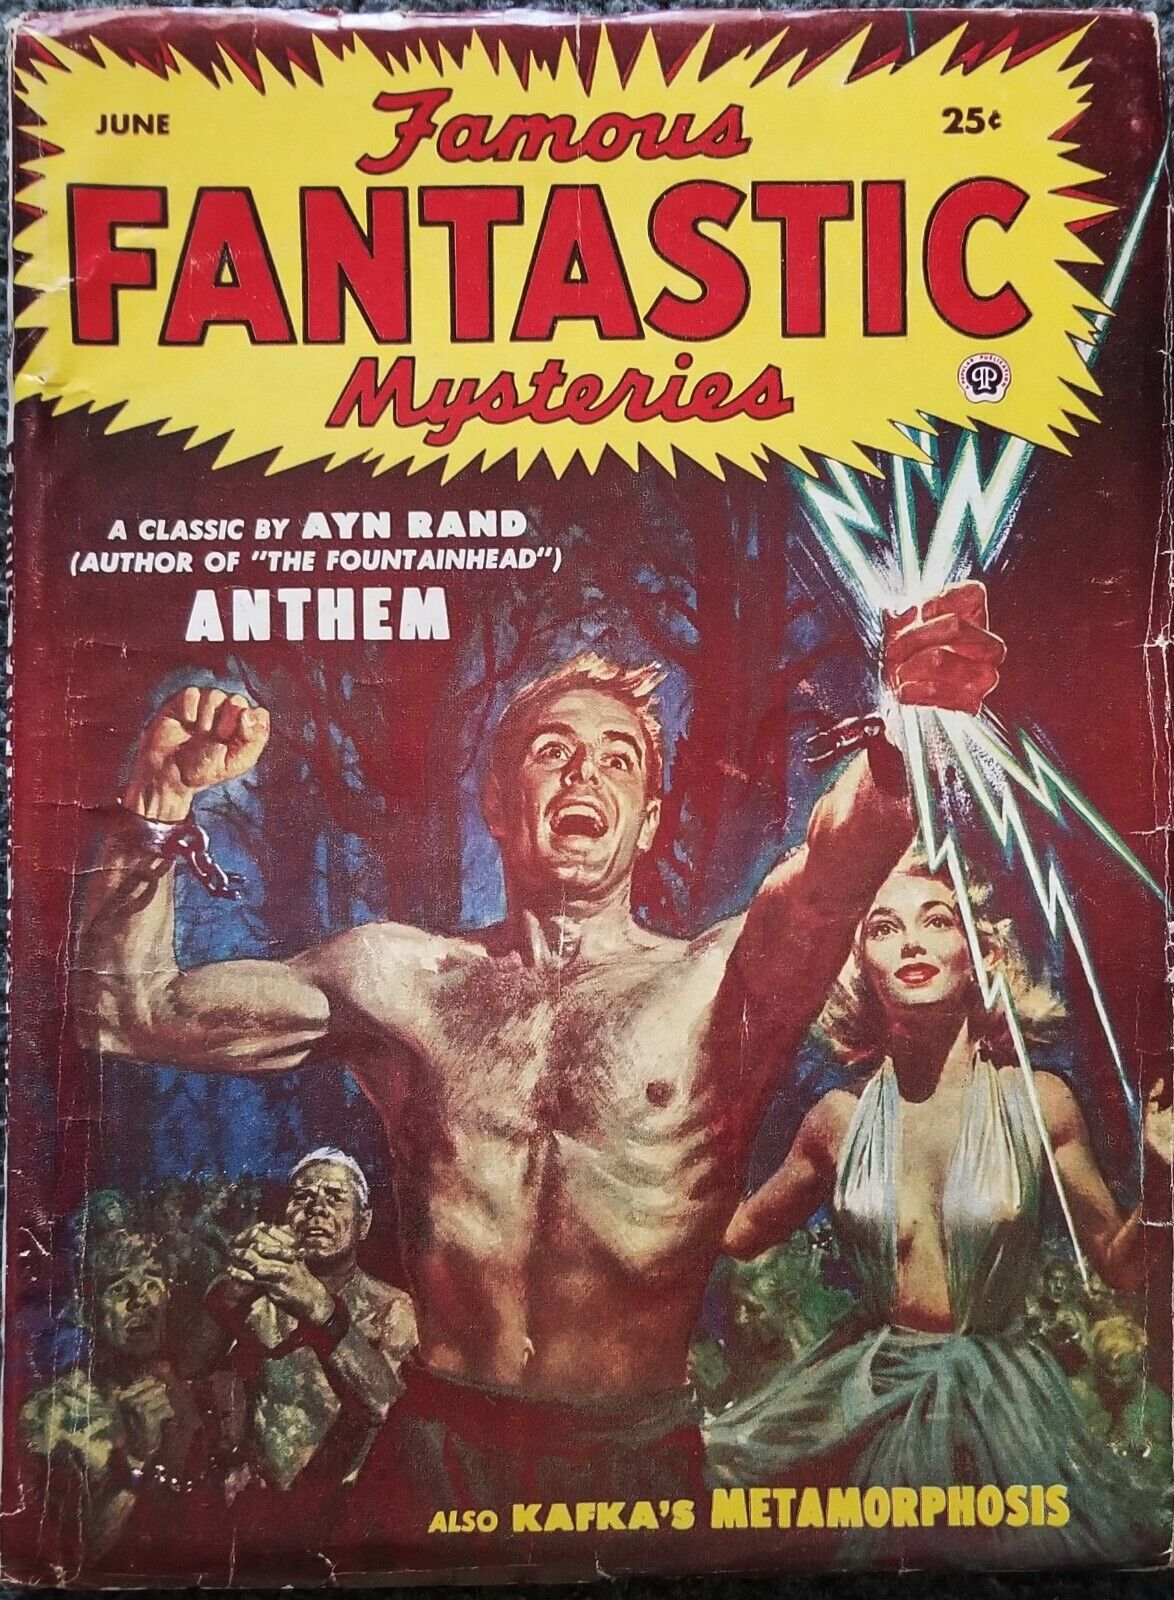 FAMOUS FANTASTIC MYSTERIES - JUNE 1953 - AYN RAND - PULP - NICE CONDITION